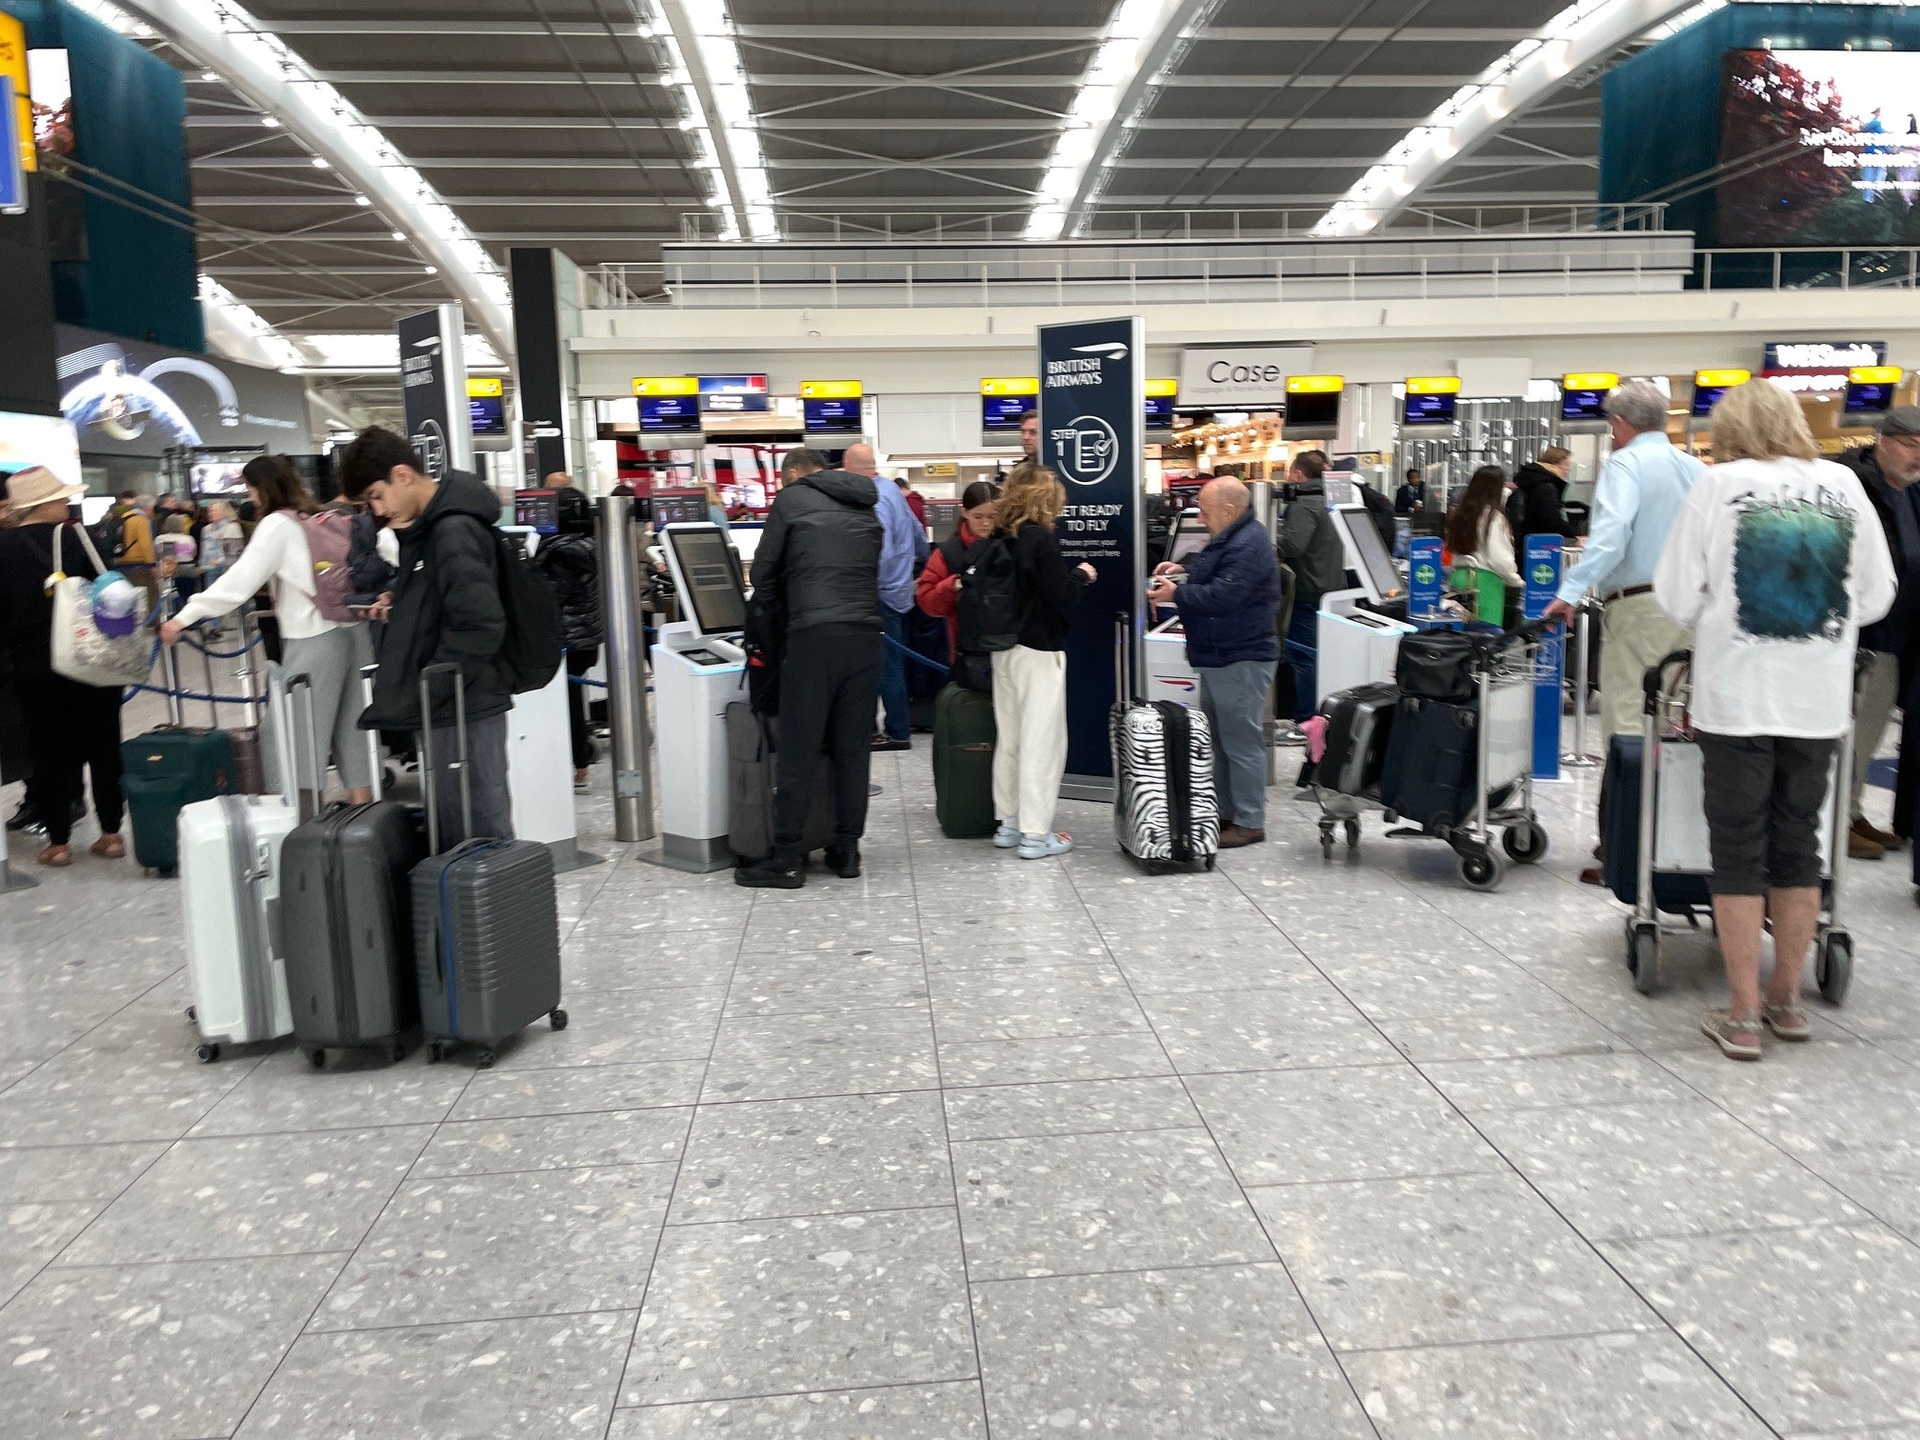 Passengers stuck in the UK and abroad described their frustration, as some had no idea when or how they would get to their destination.